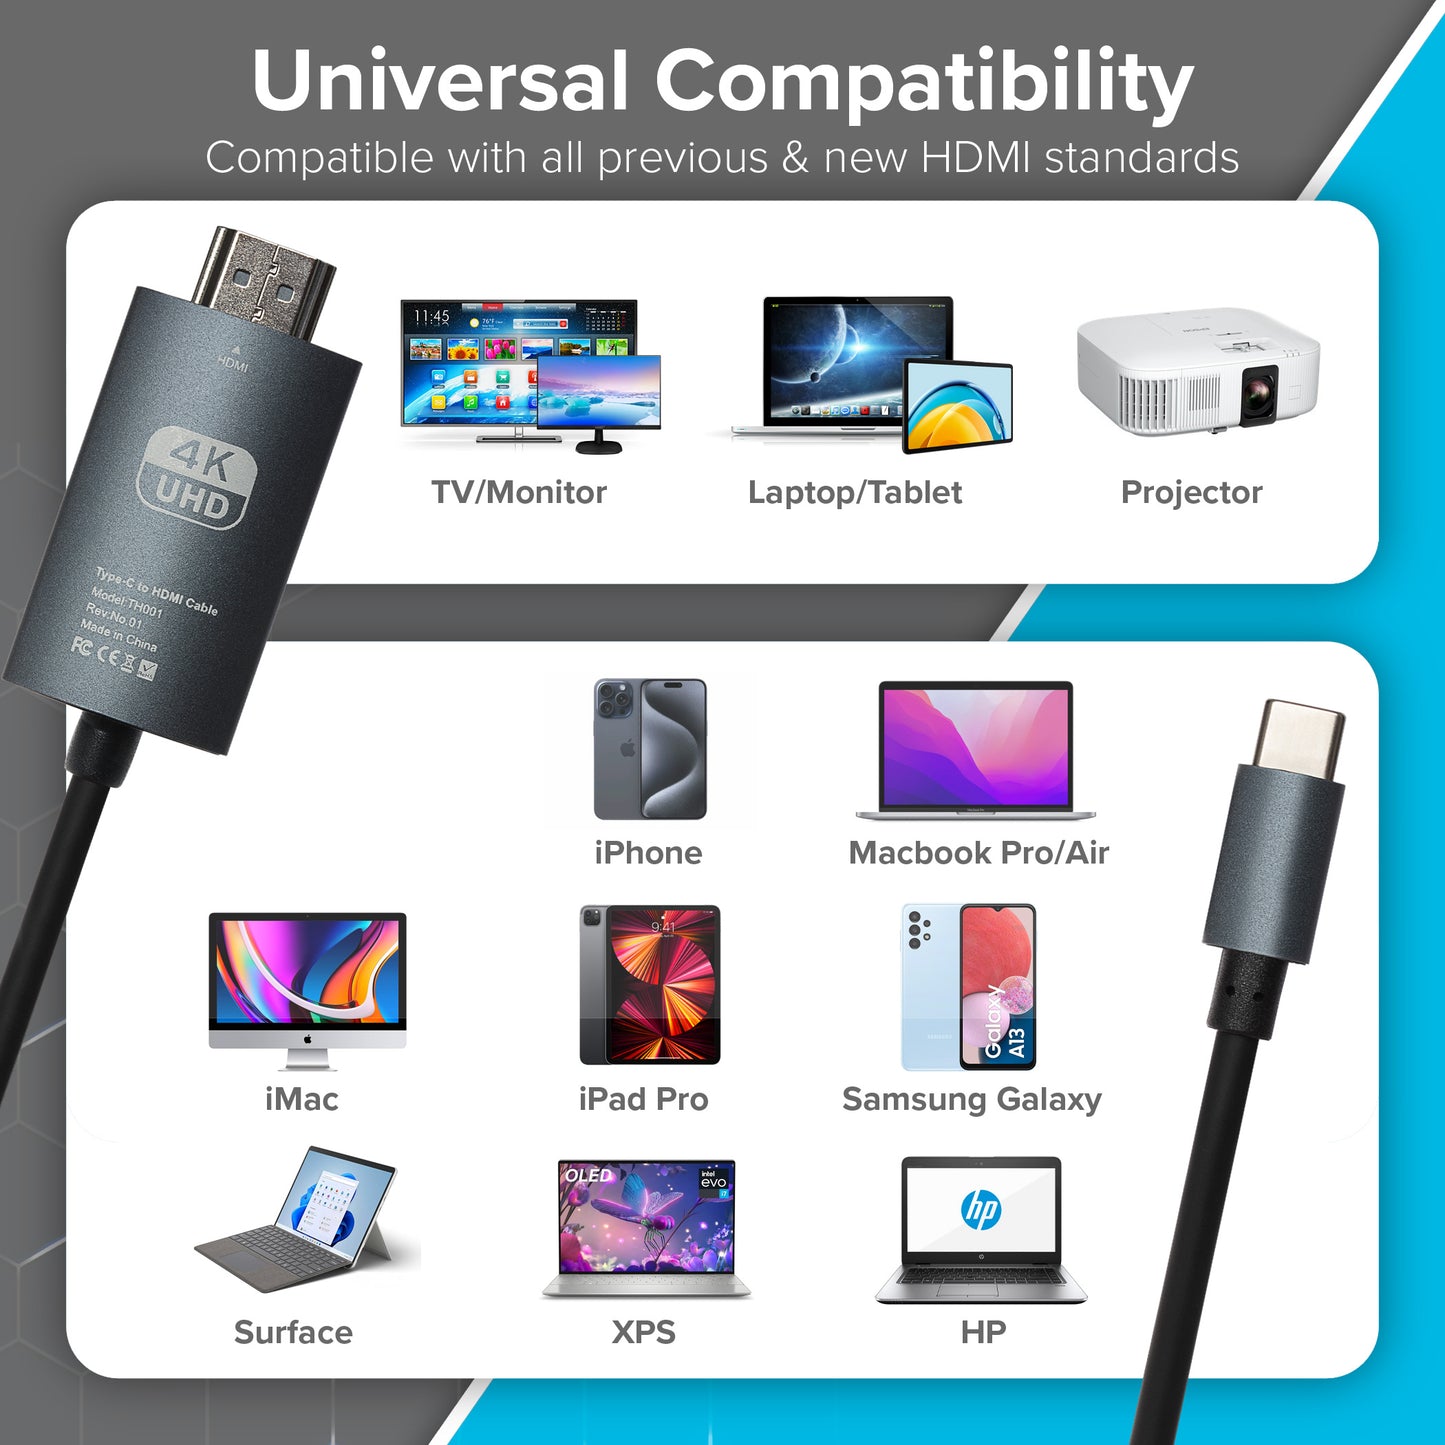 Maplin USB-C to HDMI Cable Adapter (Supports 4K Ultra HD @ 60Hz) - Black - maplin.co.uk